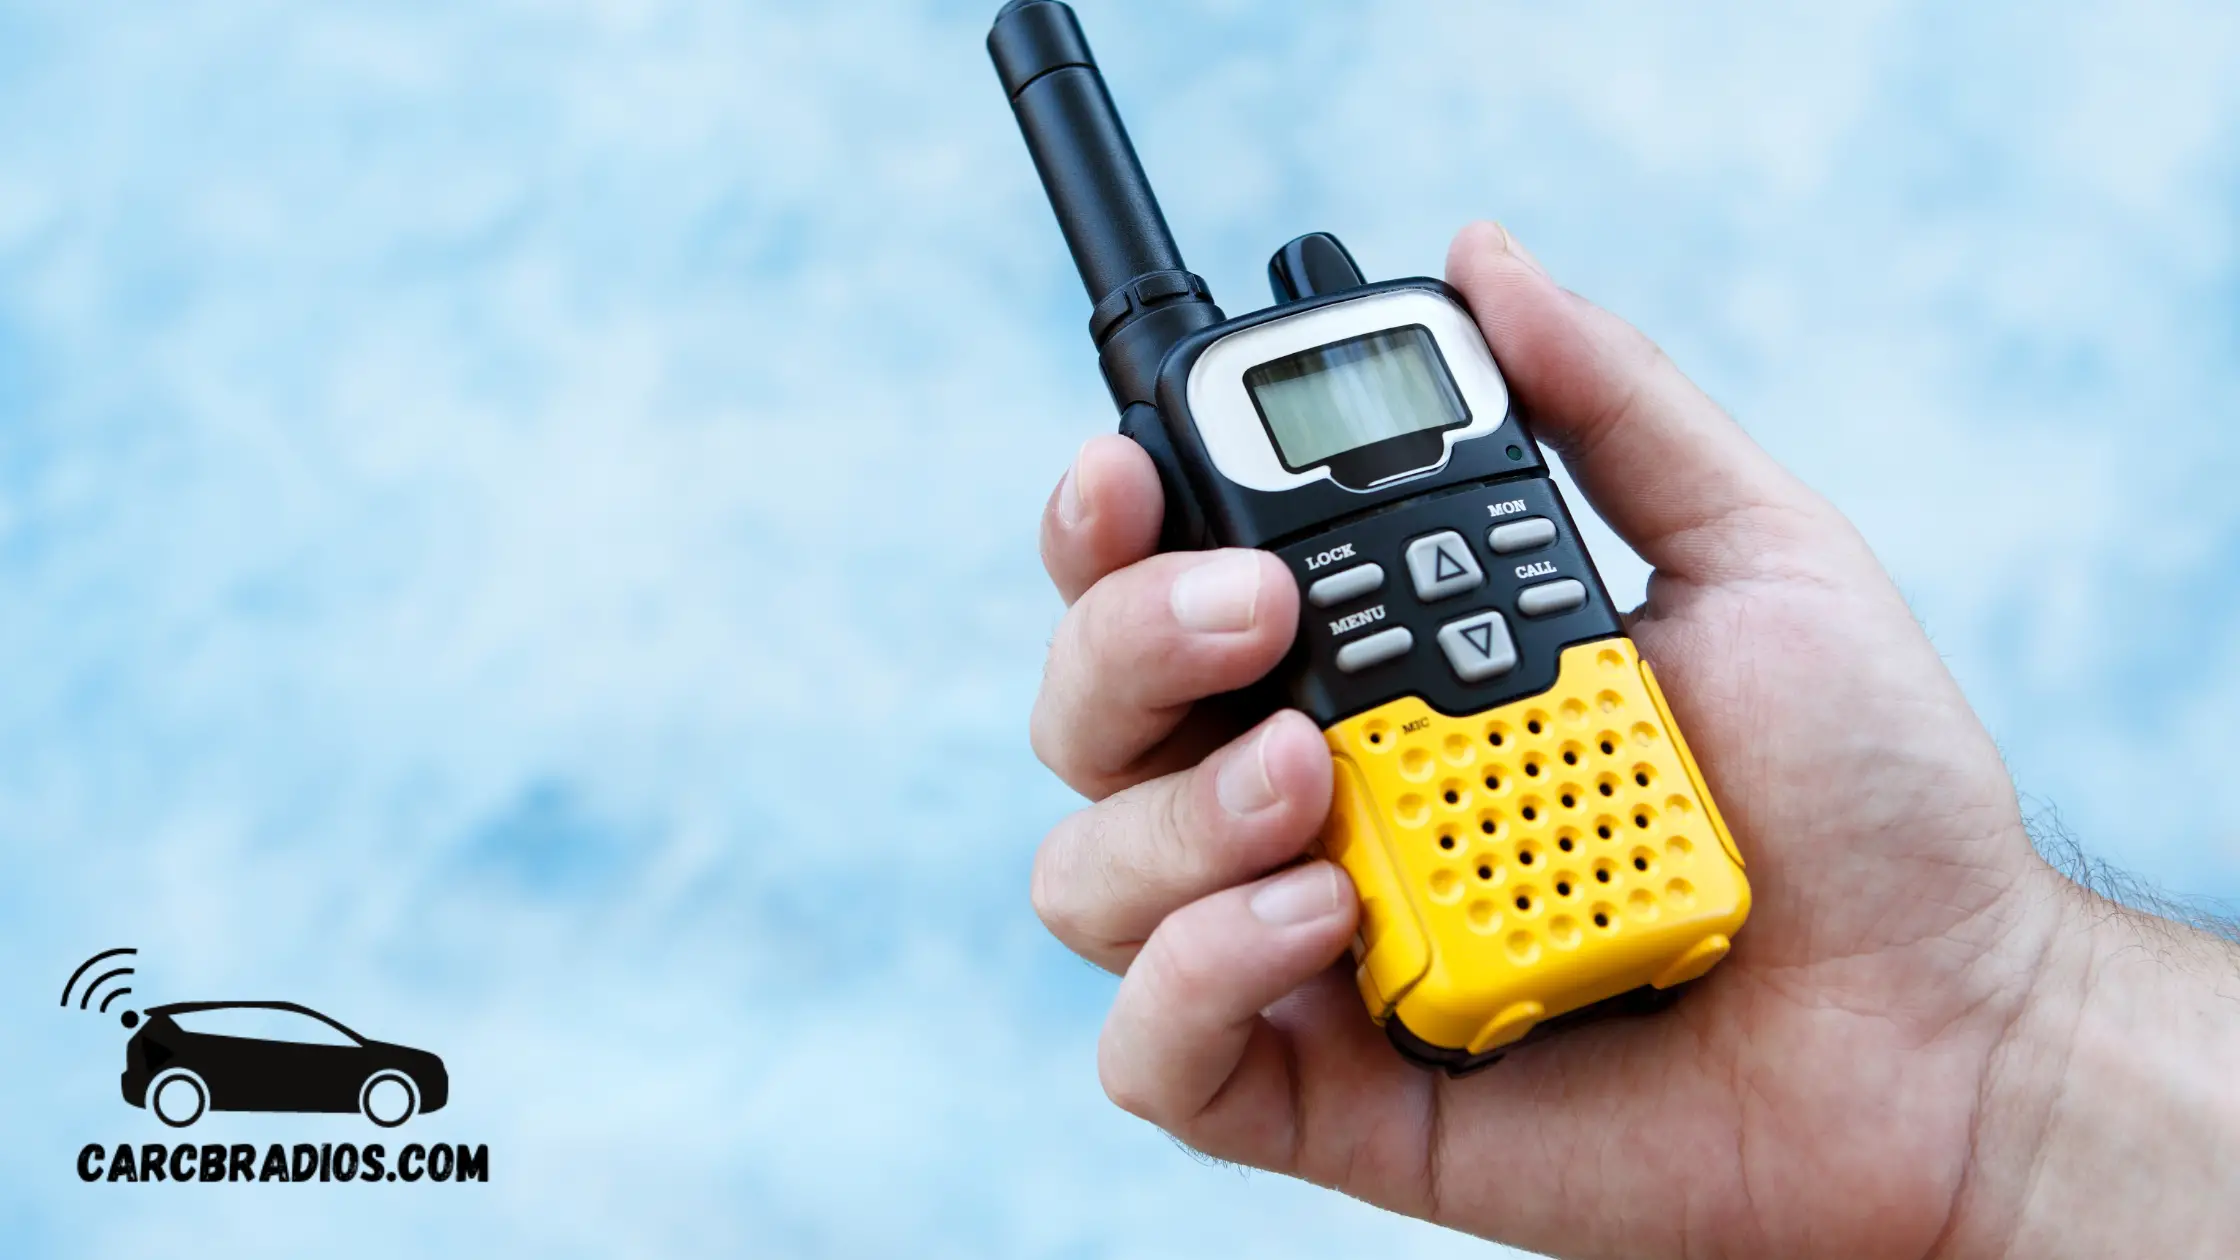 Walkie Talkie Etiquette for Beginners - 10 tips - Speak Slowly & Clearly
If your walkie-talkie connection is poor or you’re in a noisy environment, it can be difficult to communicate. Regardless of where you are using a walkie talkie, avoid speaking too quickly.
If there is a lot of noise or your connection sounds slightly distorted, when you speak too rapidly it can be almost impossible to understand what you are saying.
Try to speak in your normal tone of voice.
Make sure the radio's mic is close to your mouth so that your voice will not be too loud for the other walkie talkie users.